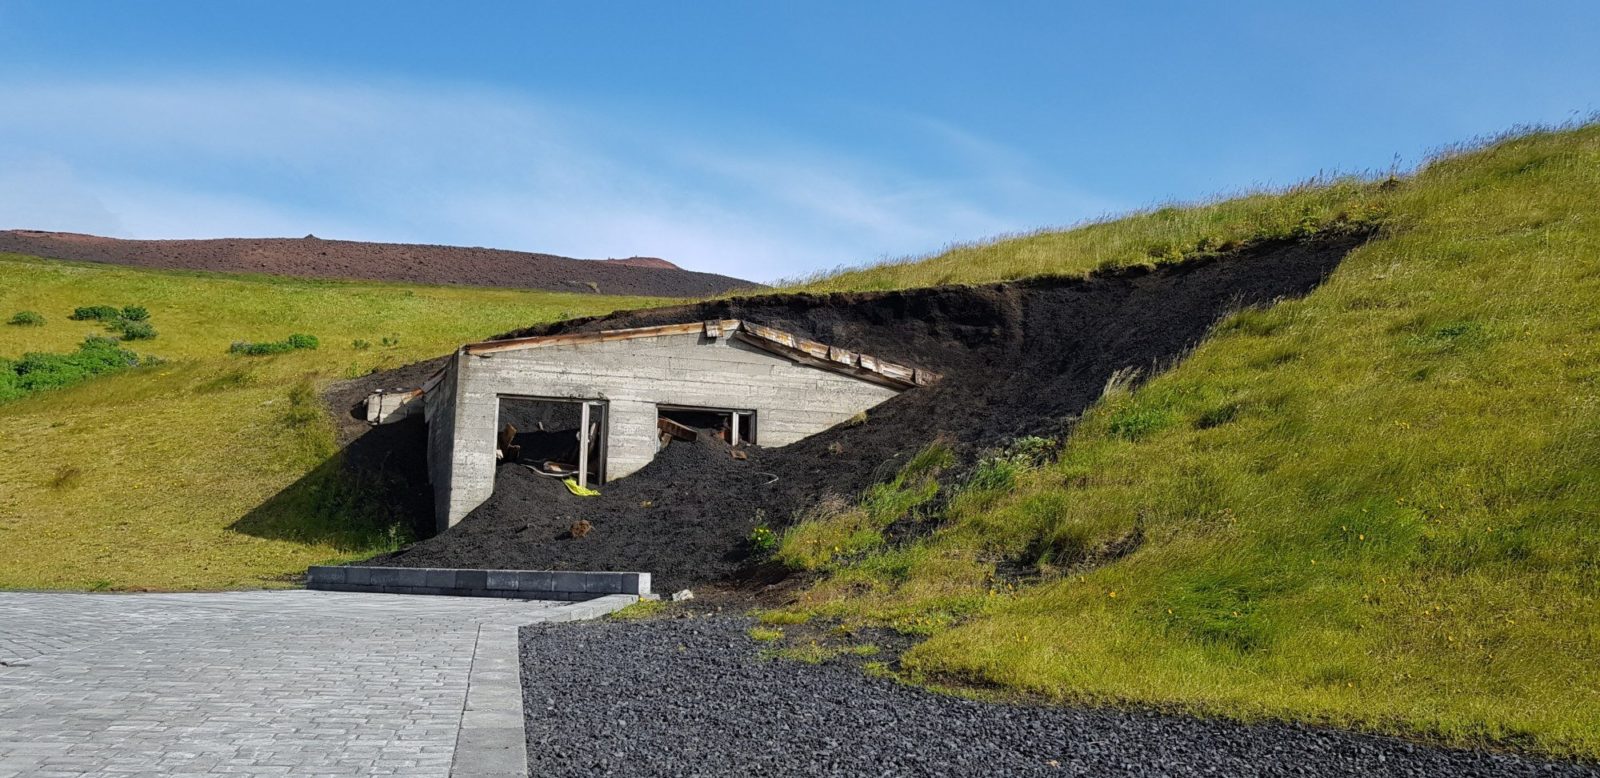 A house buried in volcanic material from the 1973 Westman Island eruption partially excavated.